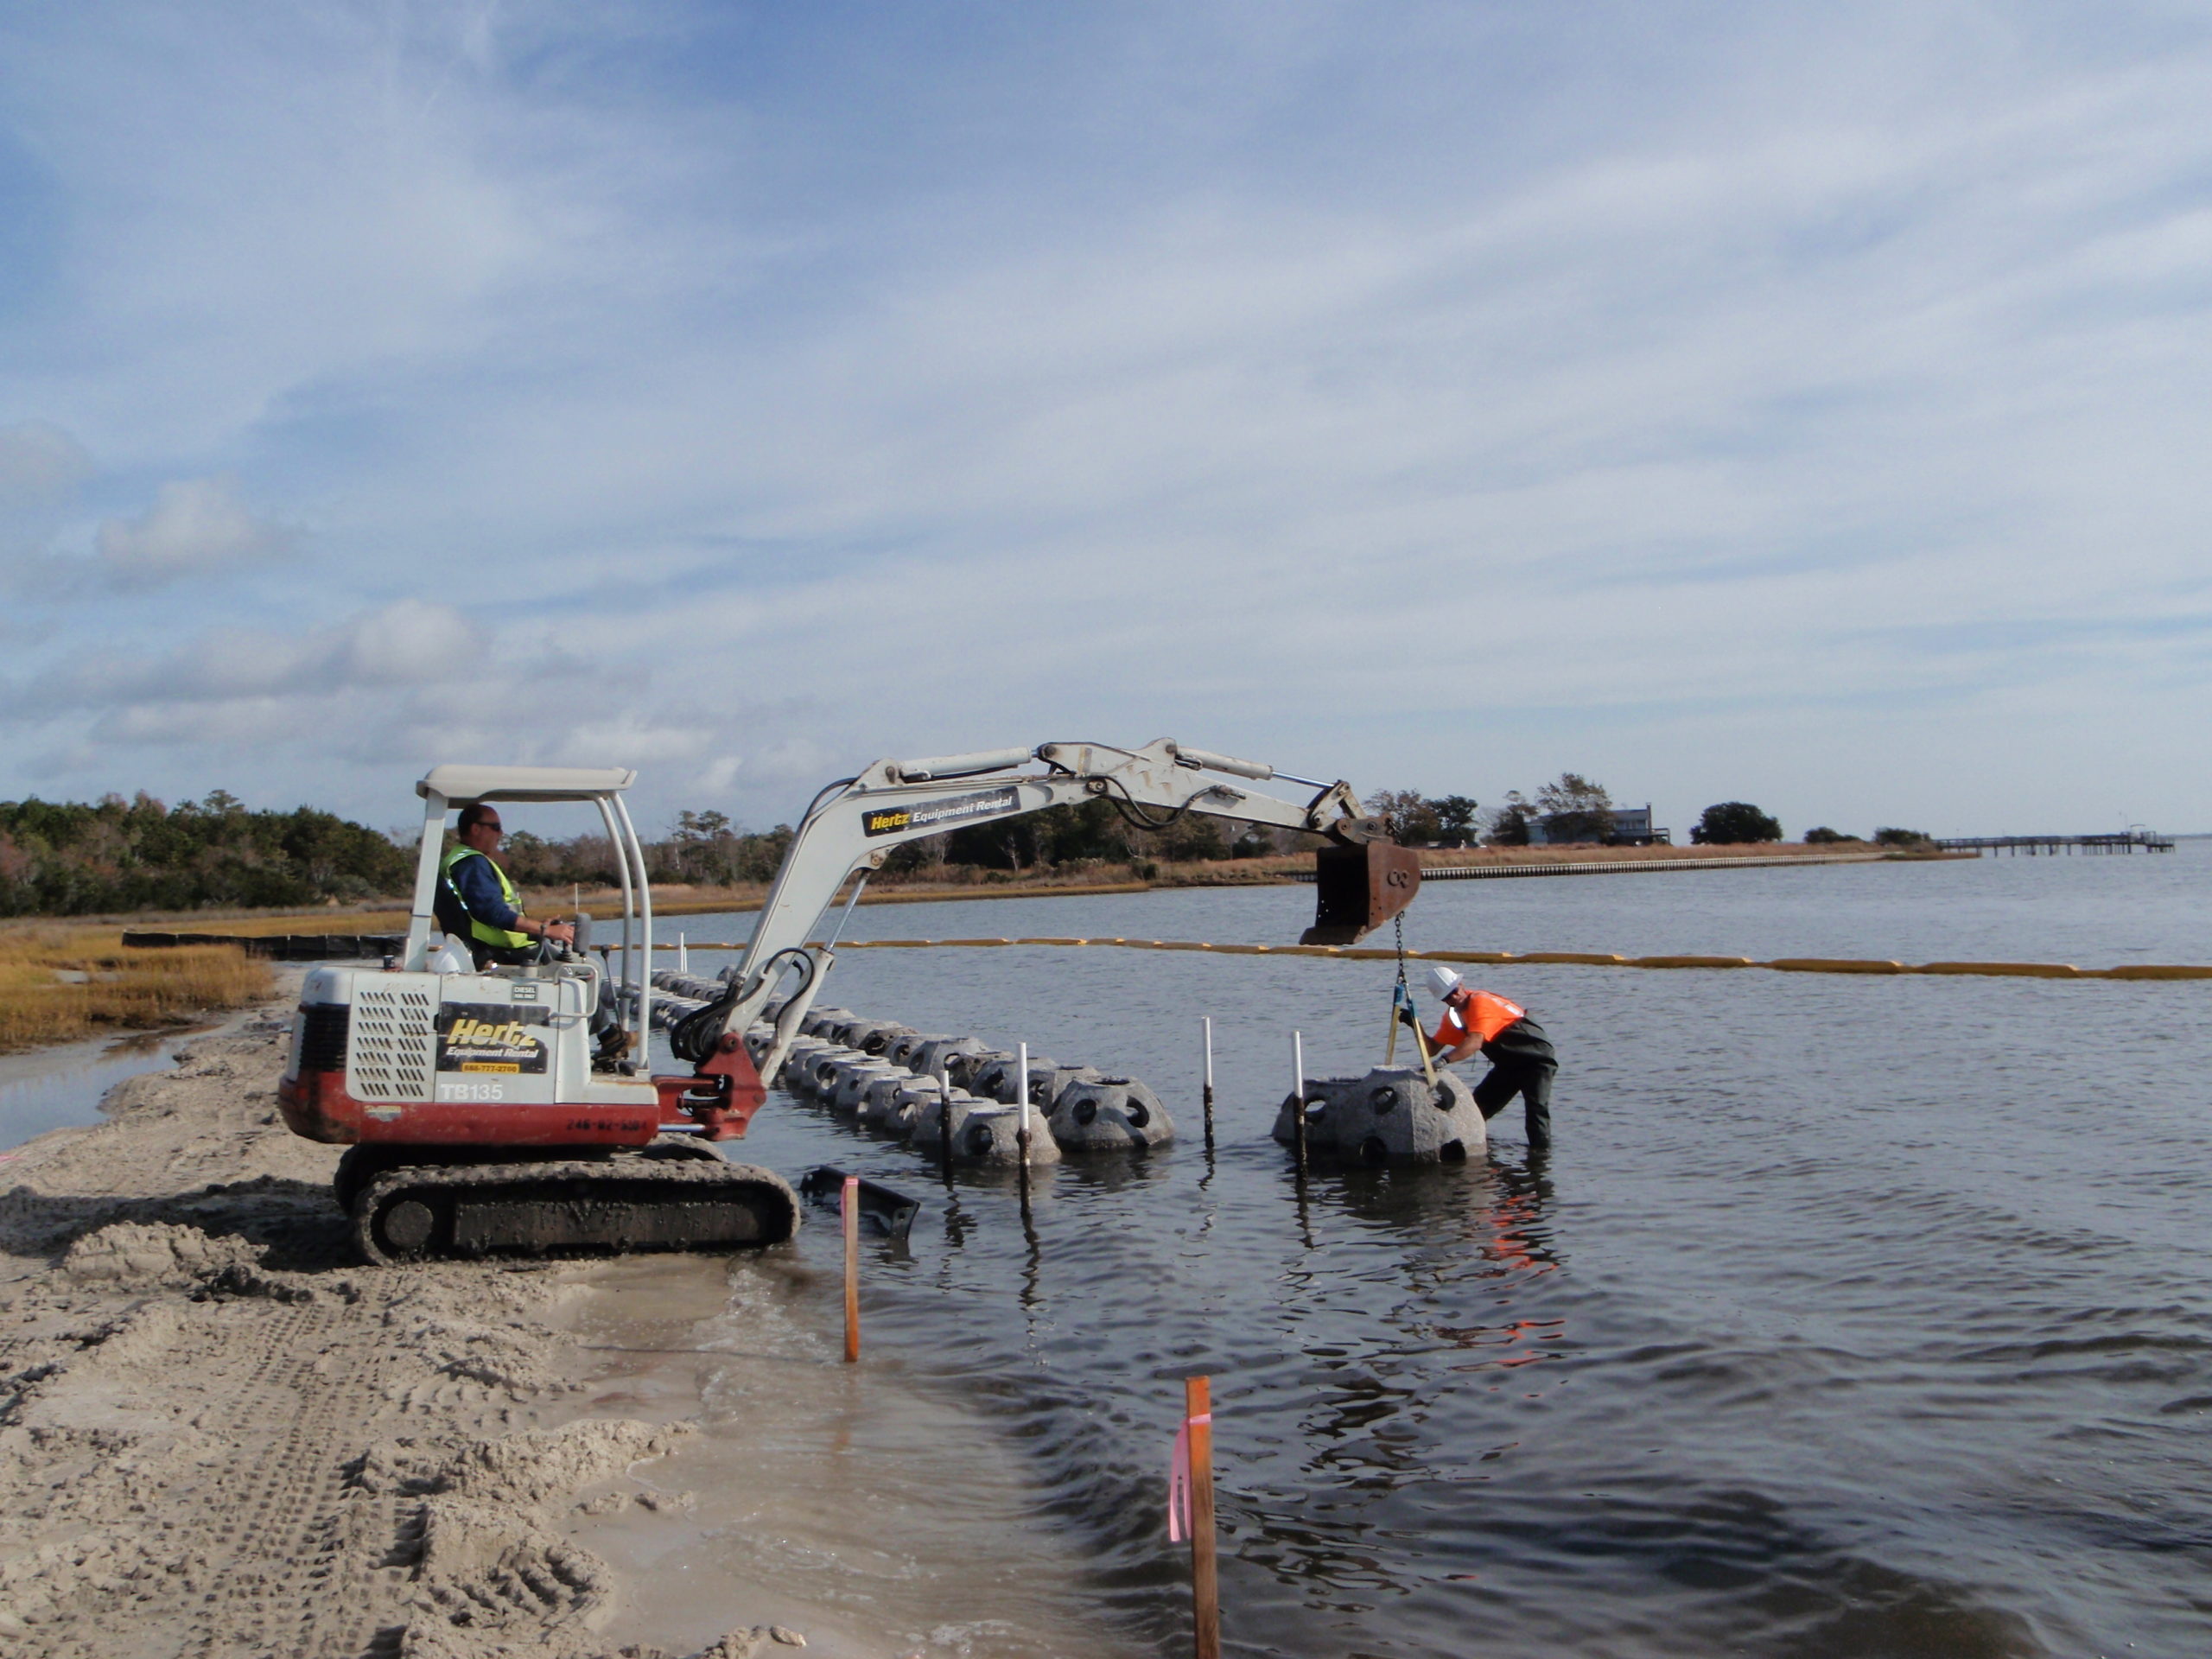 A 150-foot section of concrete oyster domes serves as the base for a newly constructed living shoreline, adding to the large shoreline and marsh restoration project at Morris Landing across from North Topsail Beach.